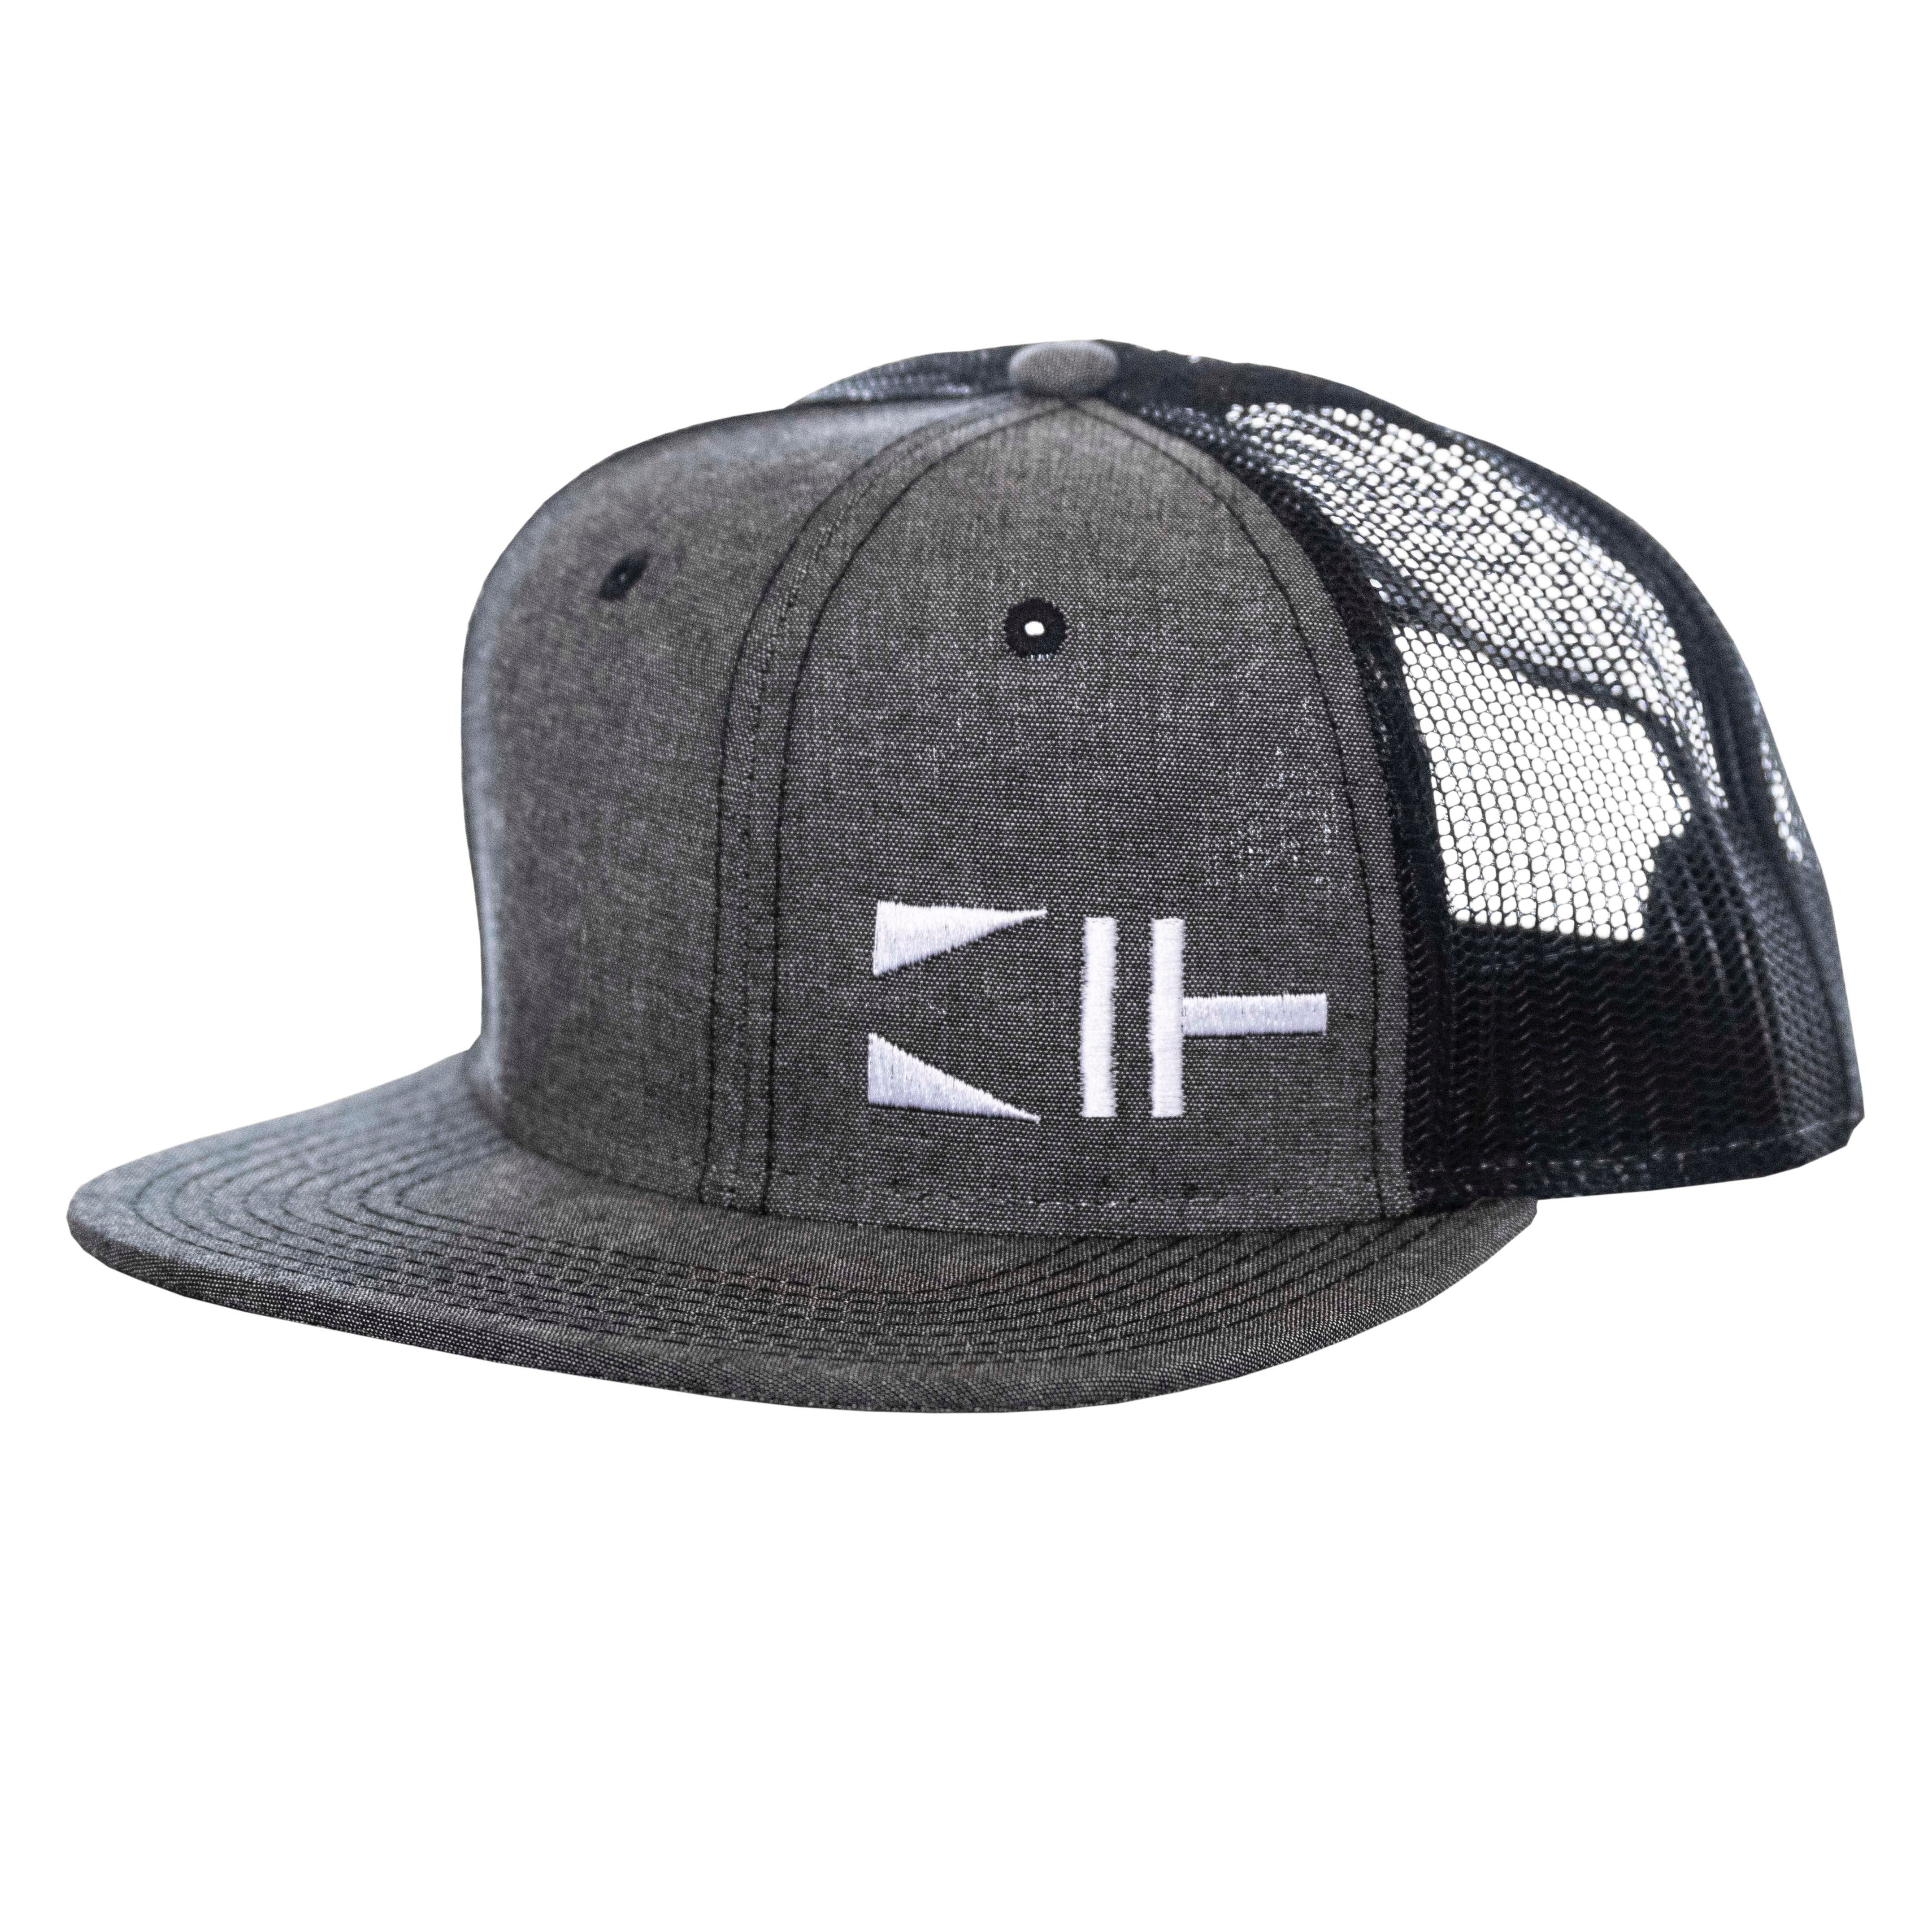 Paint Life Skater Hat Chambray